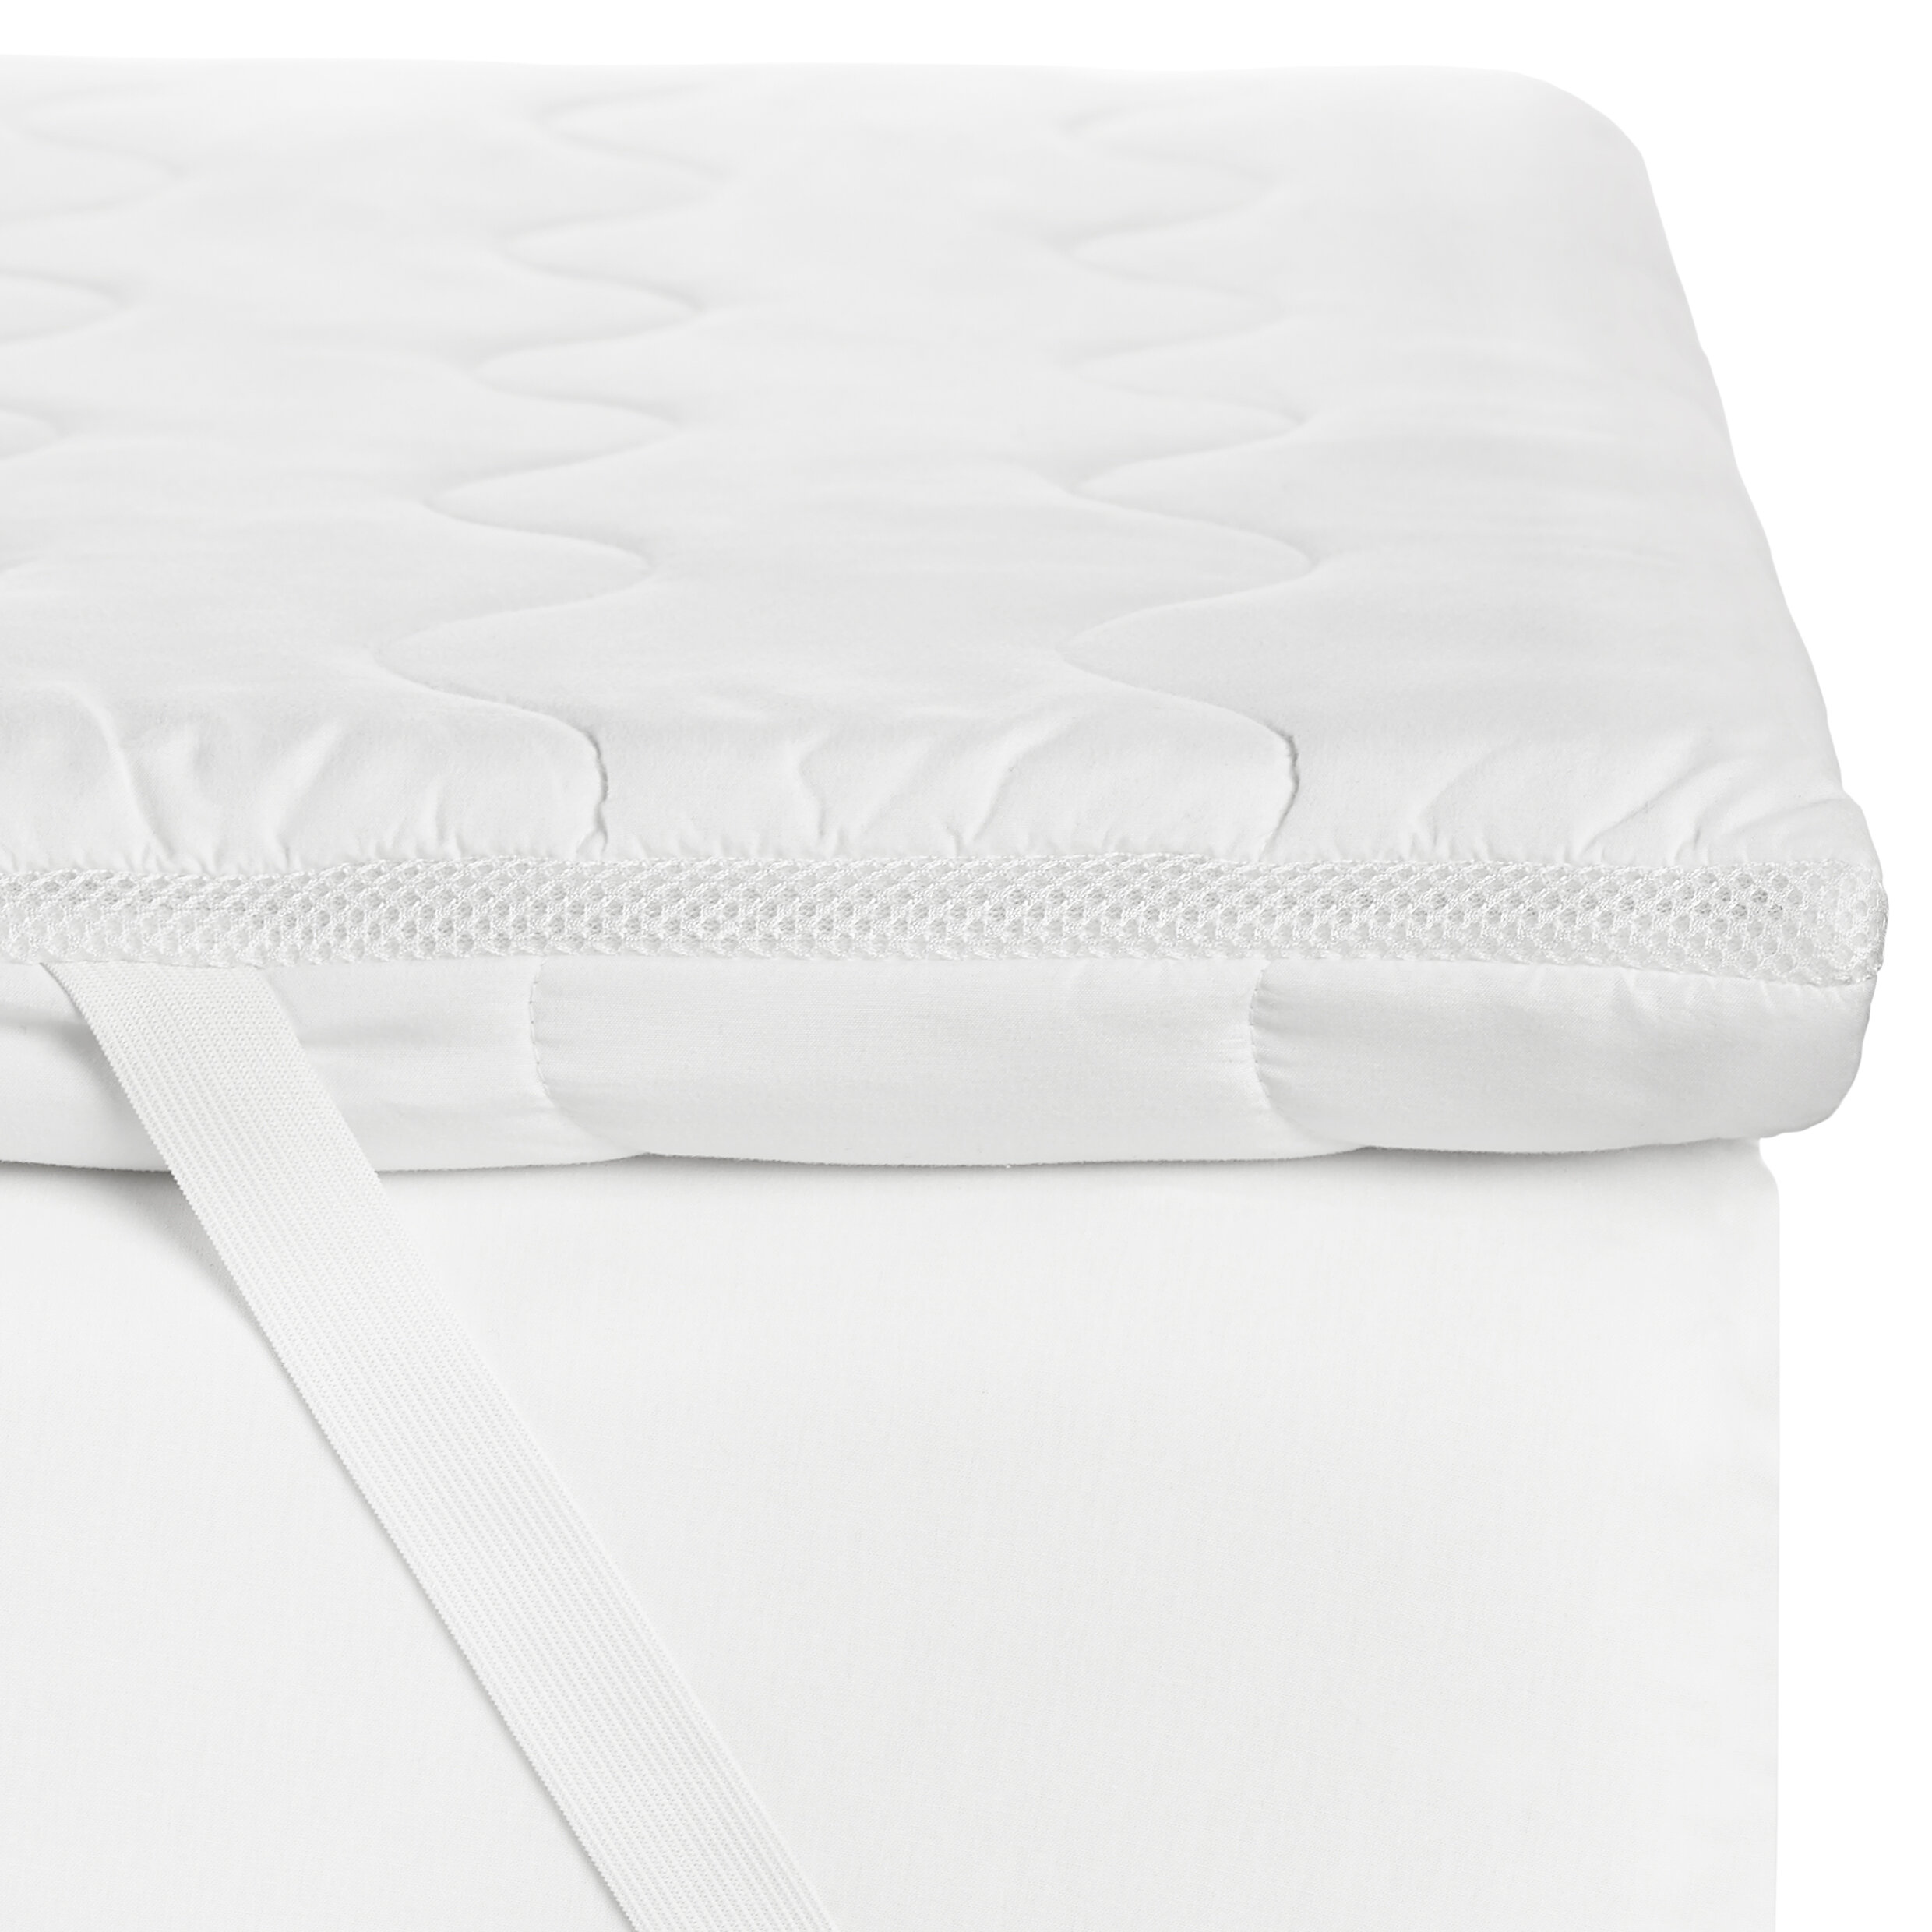 Silentnight Airmax Double Mattress Topper Cover Stretchy Corner